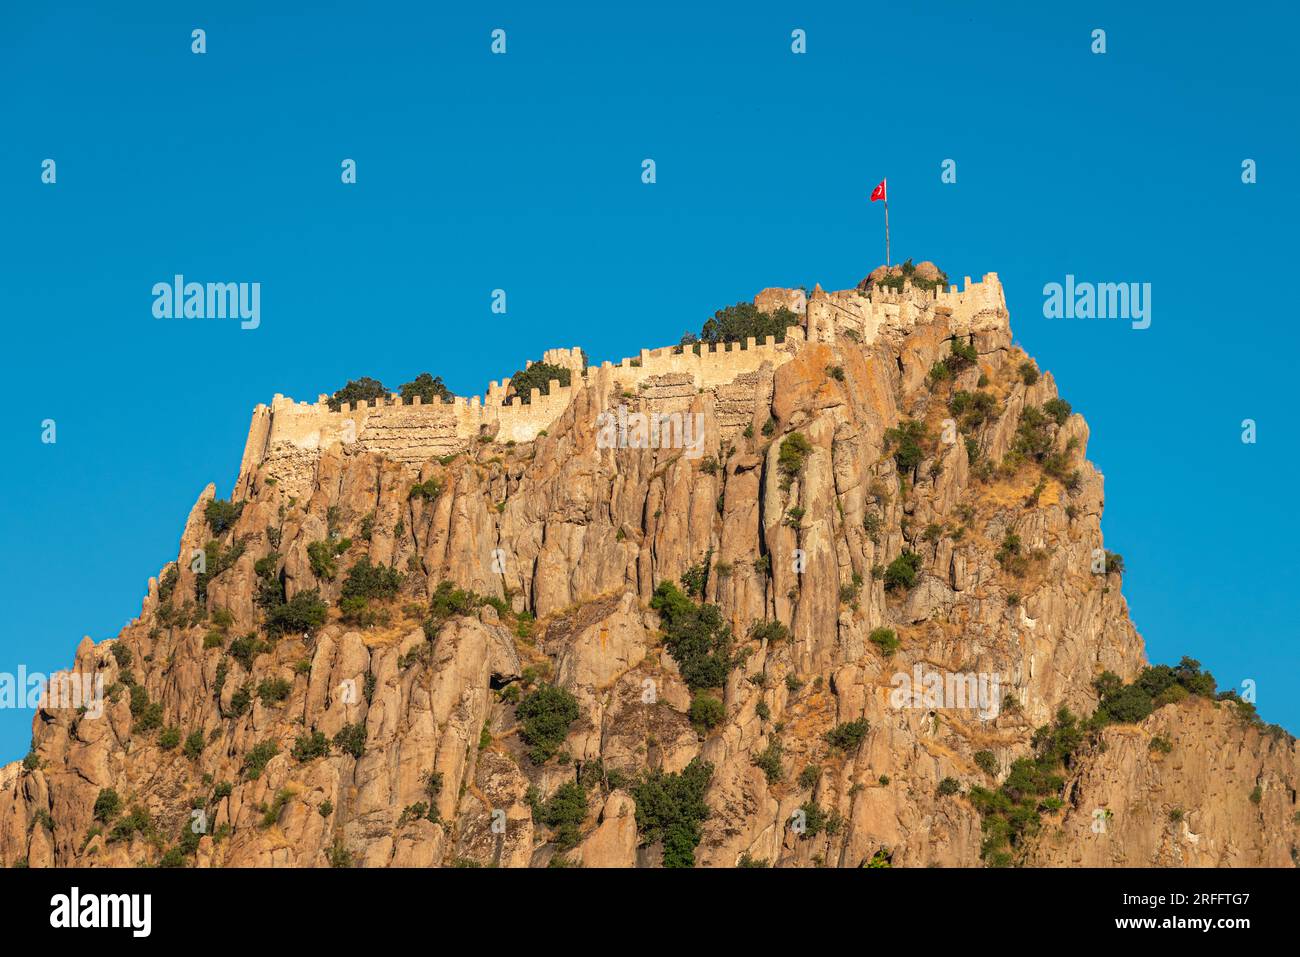 Afyon castle on the rock in Afyonkarahisar Turkey in front of a sunny blue sky Stock Photo